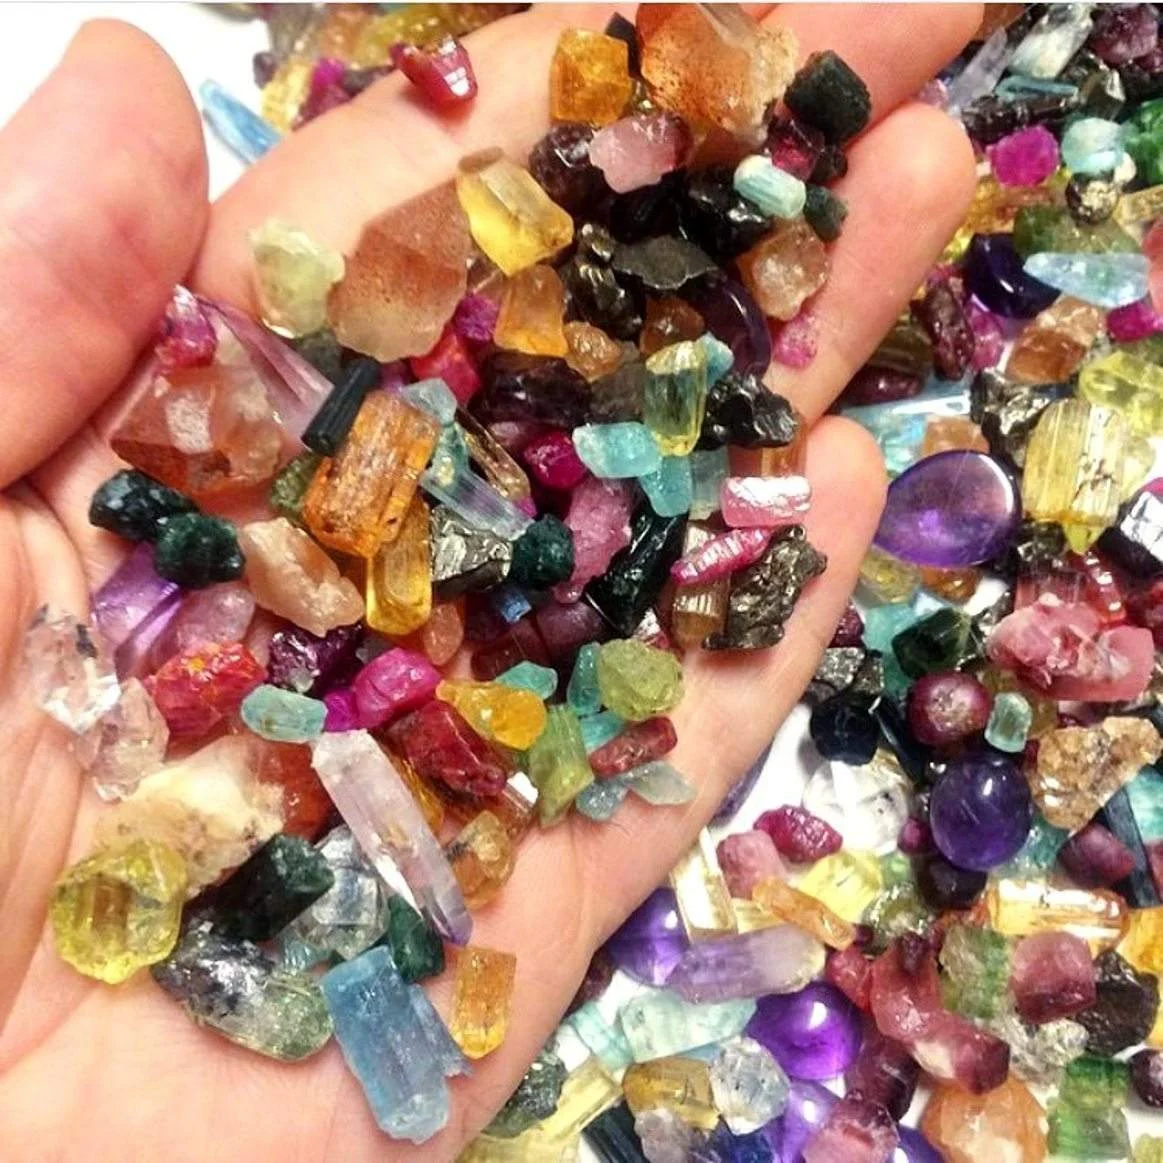 Texas & New Mexico Rockhounding: Places to Dig for Gemstones